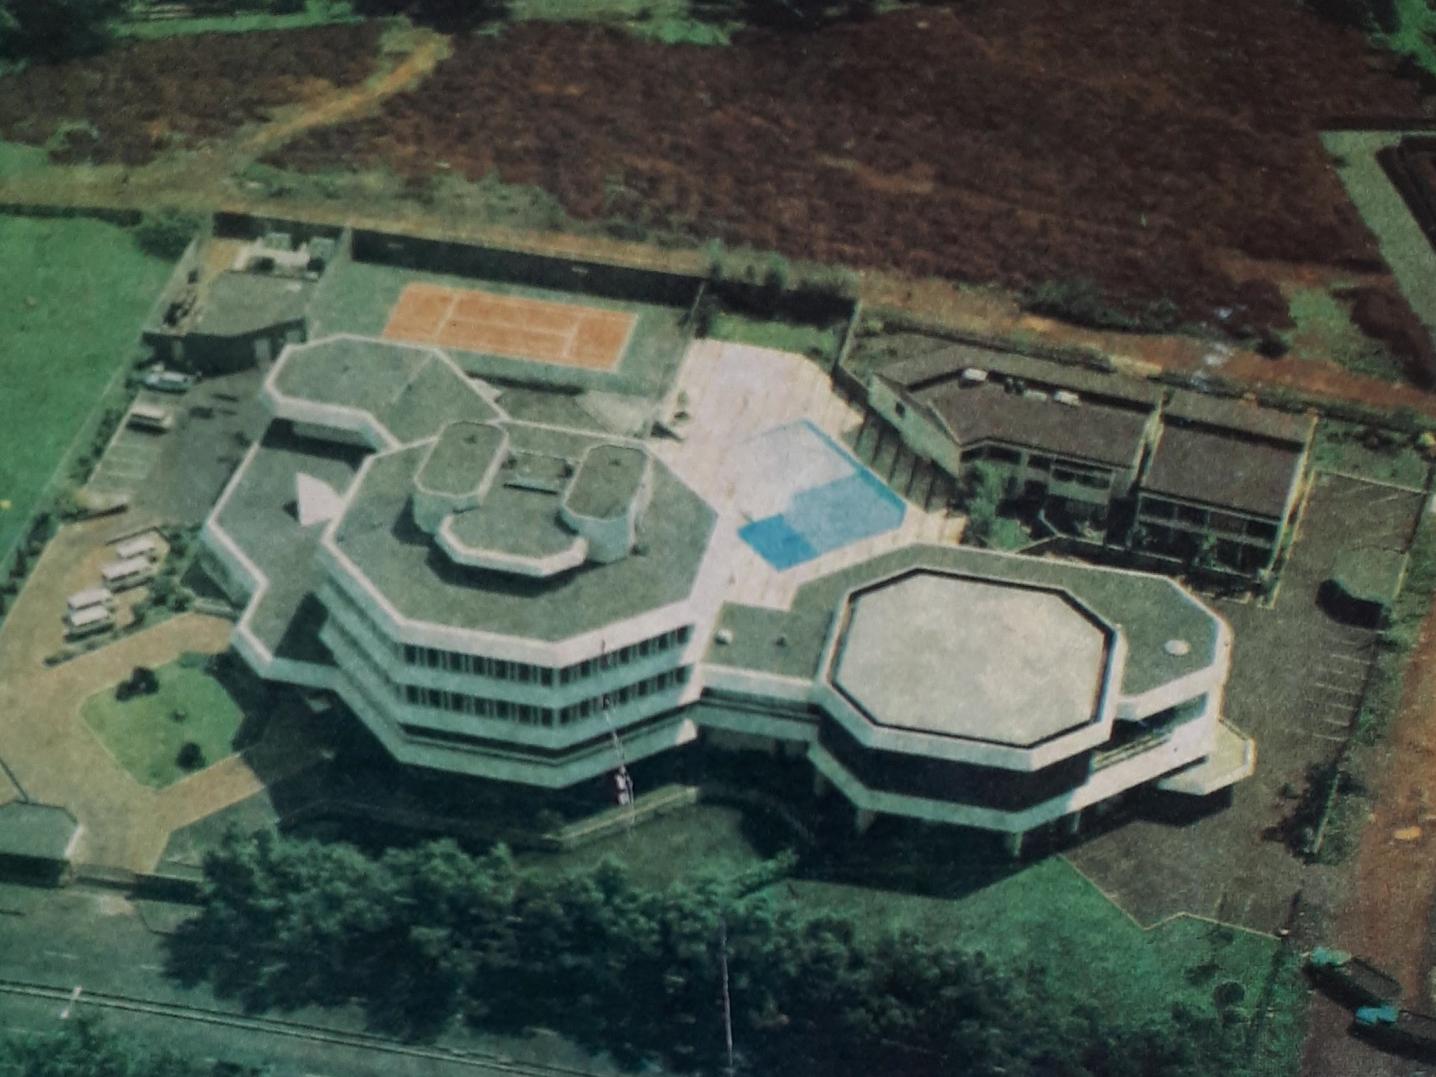 a 1981 aerial view of the compound of the Netherlands Embassy and Erasmus Huis in Kuningan, Jakarta